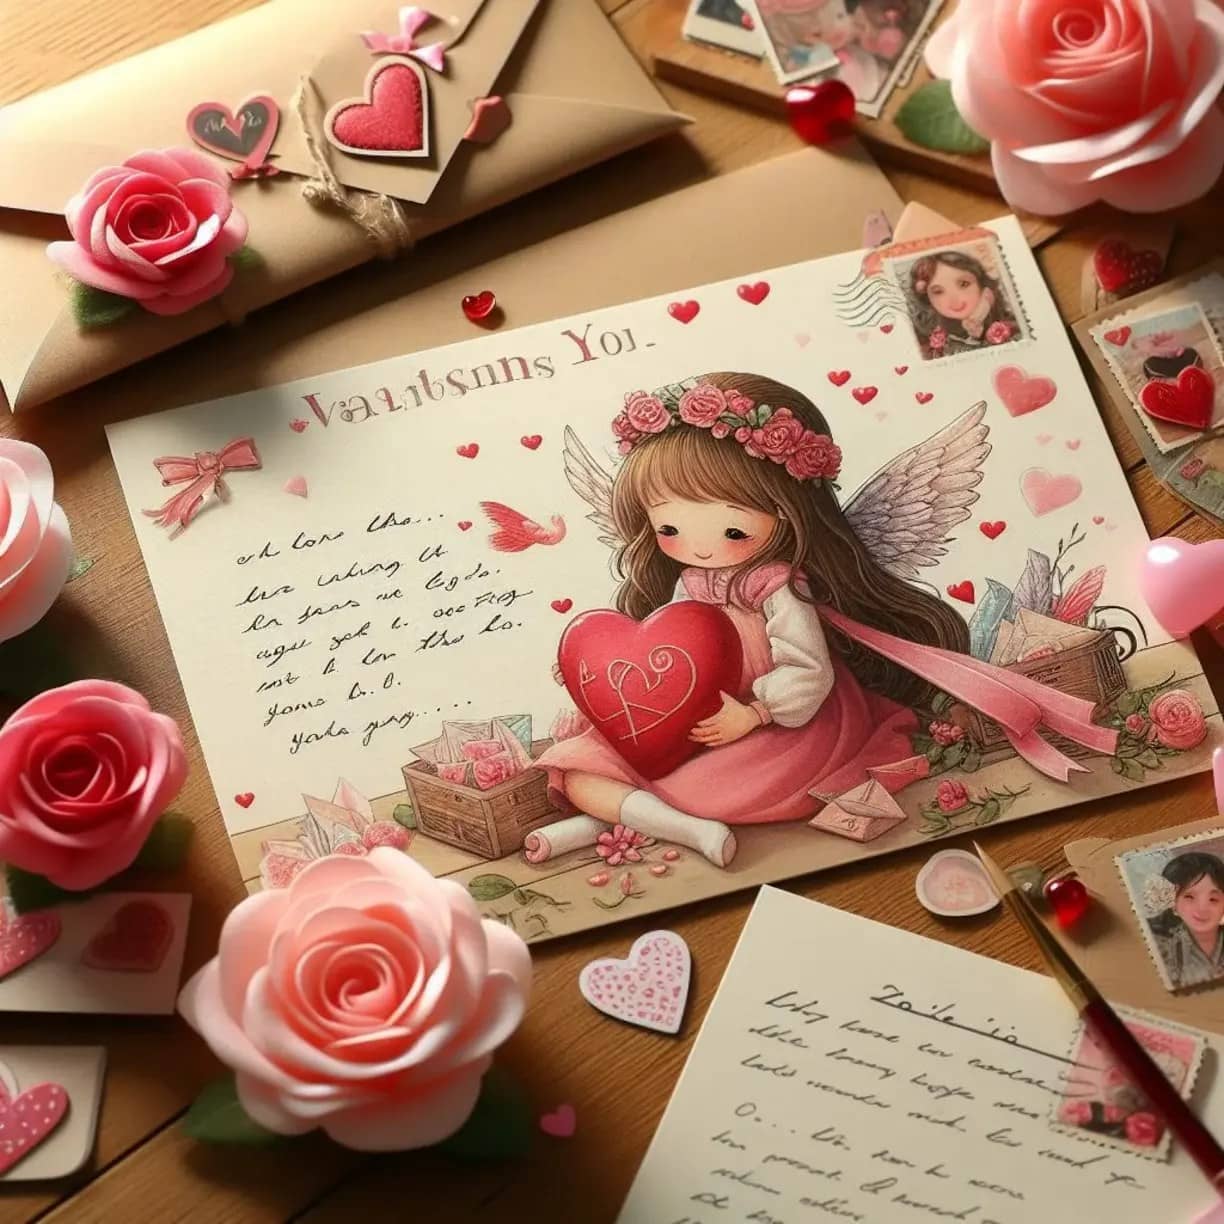 Personalized Love Letters for Valentine’s Day: Express Your Affection with Words